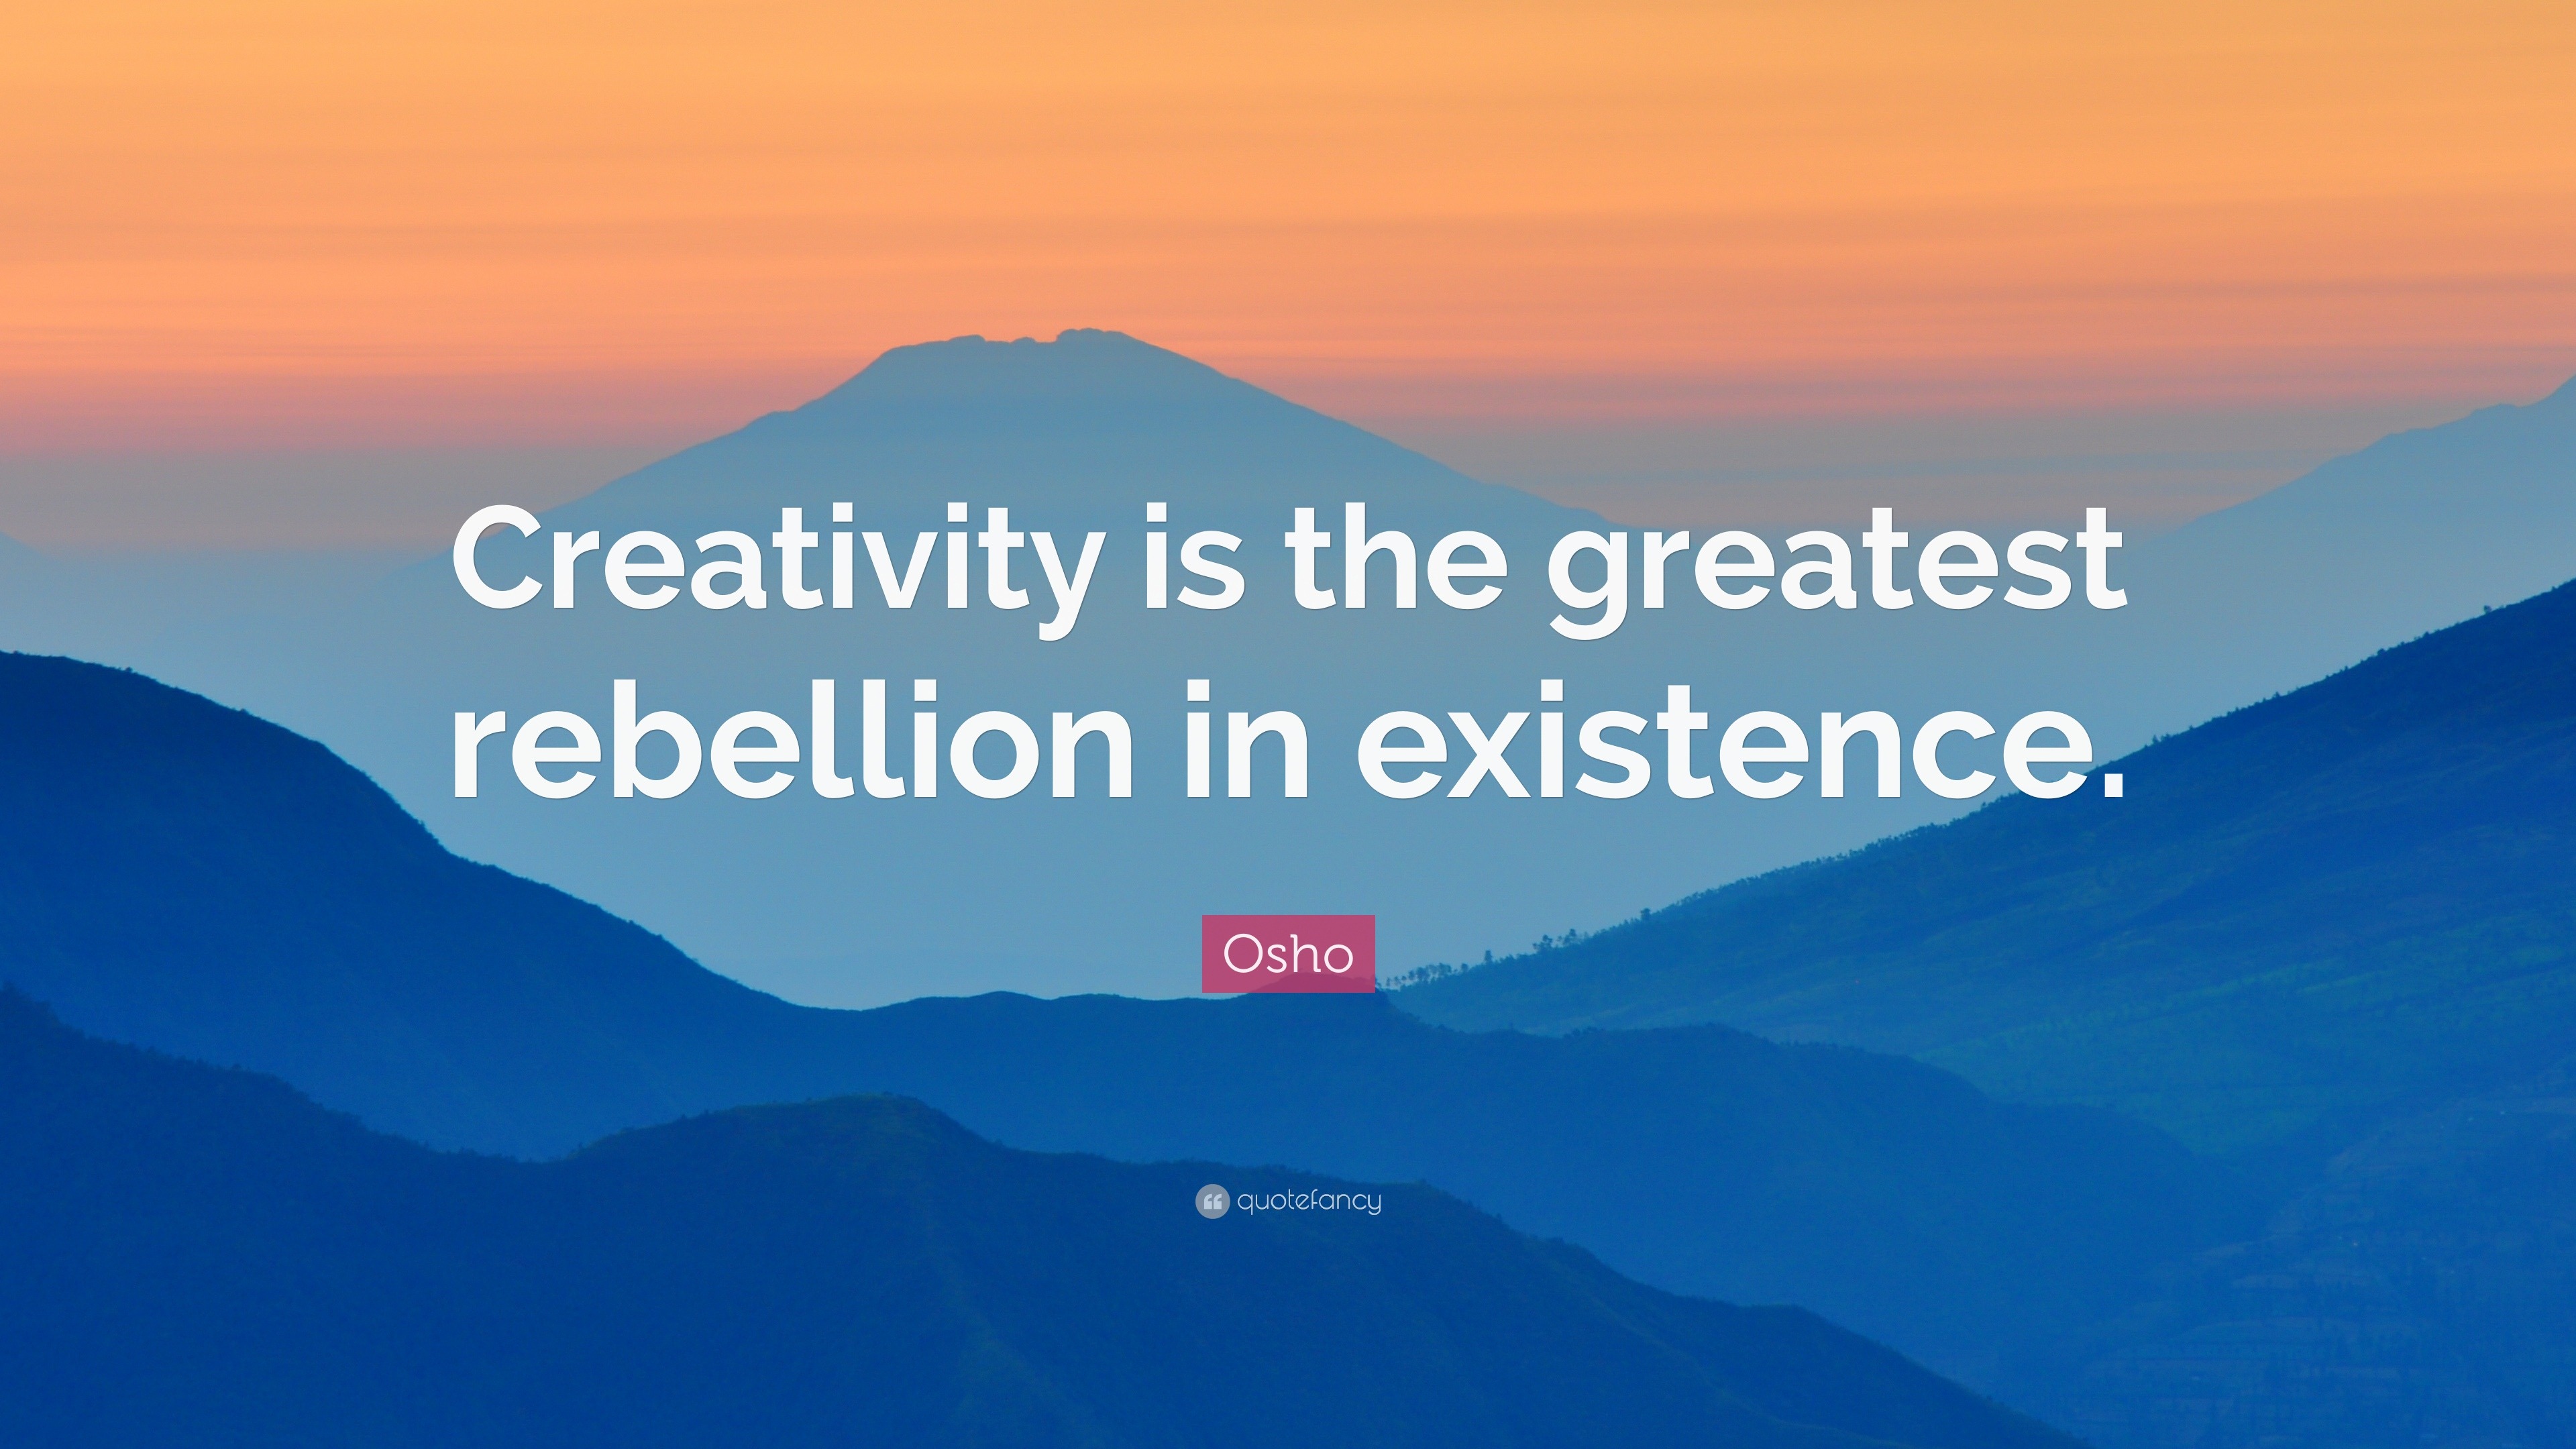 essay on creativity is the greatest rebellion in existence